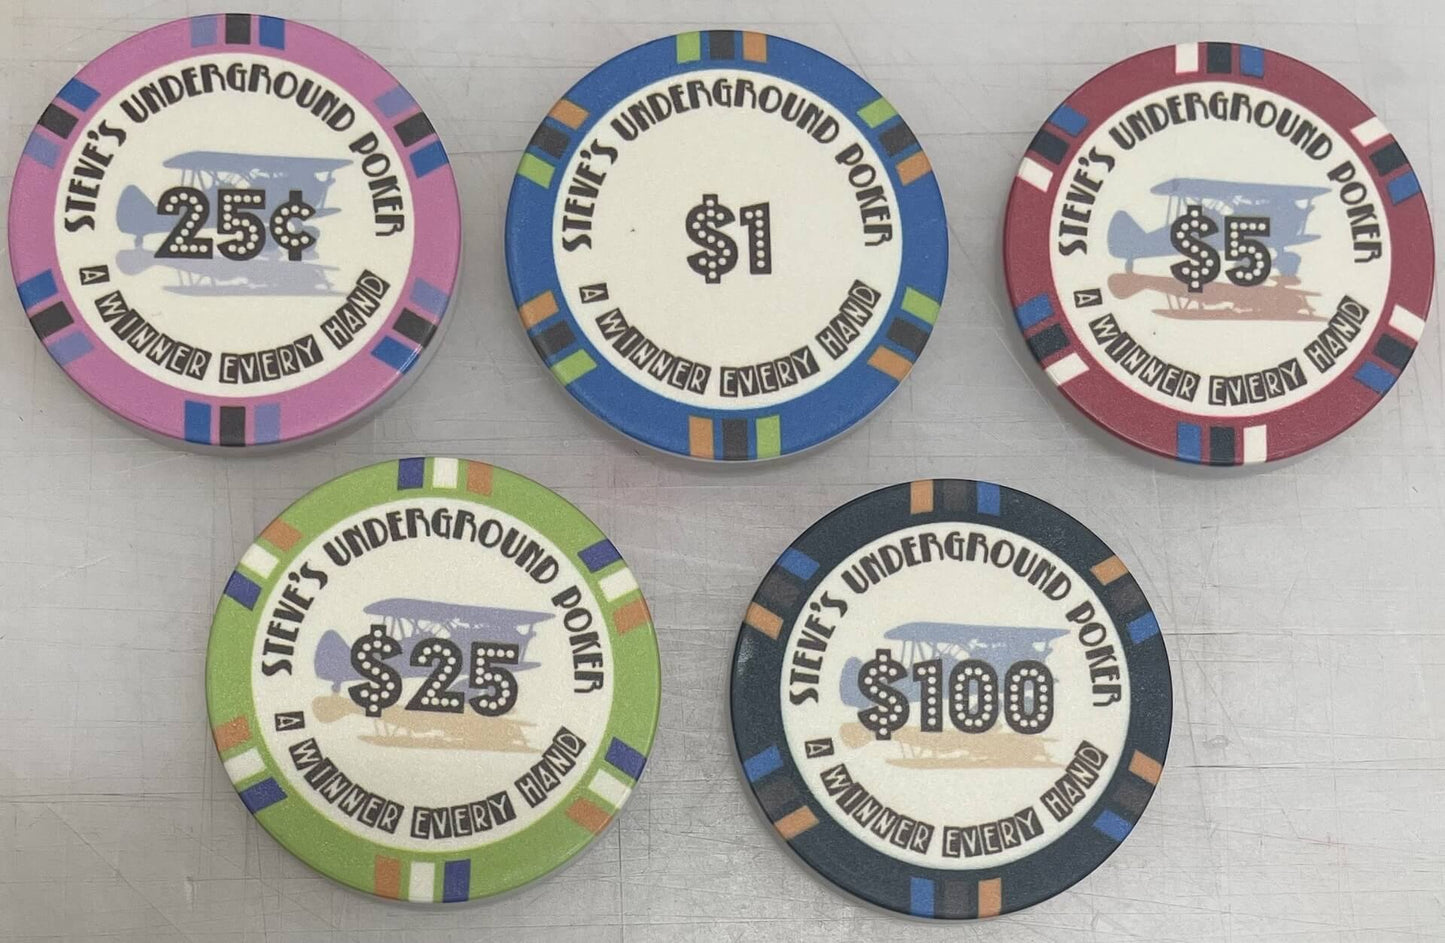 Aurora Poker Gear Custom Poker Chips for Christmas Gift for Her Husband - Winterstine - Set of personalized 39mm poker chips with custom engraving and graphics made by Aurora Poker Gear, intended as a Christmas gift.